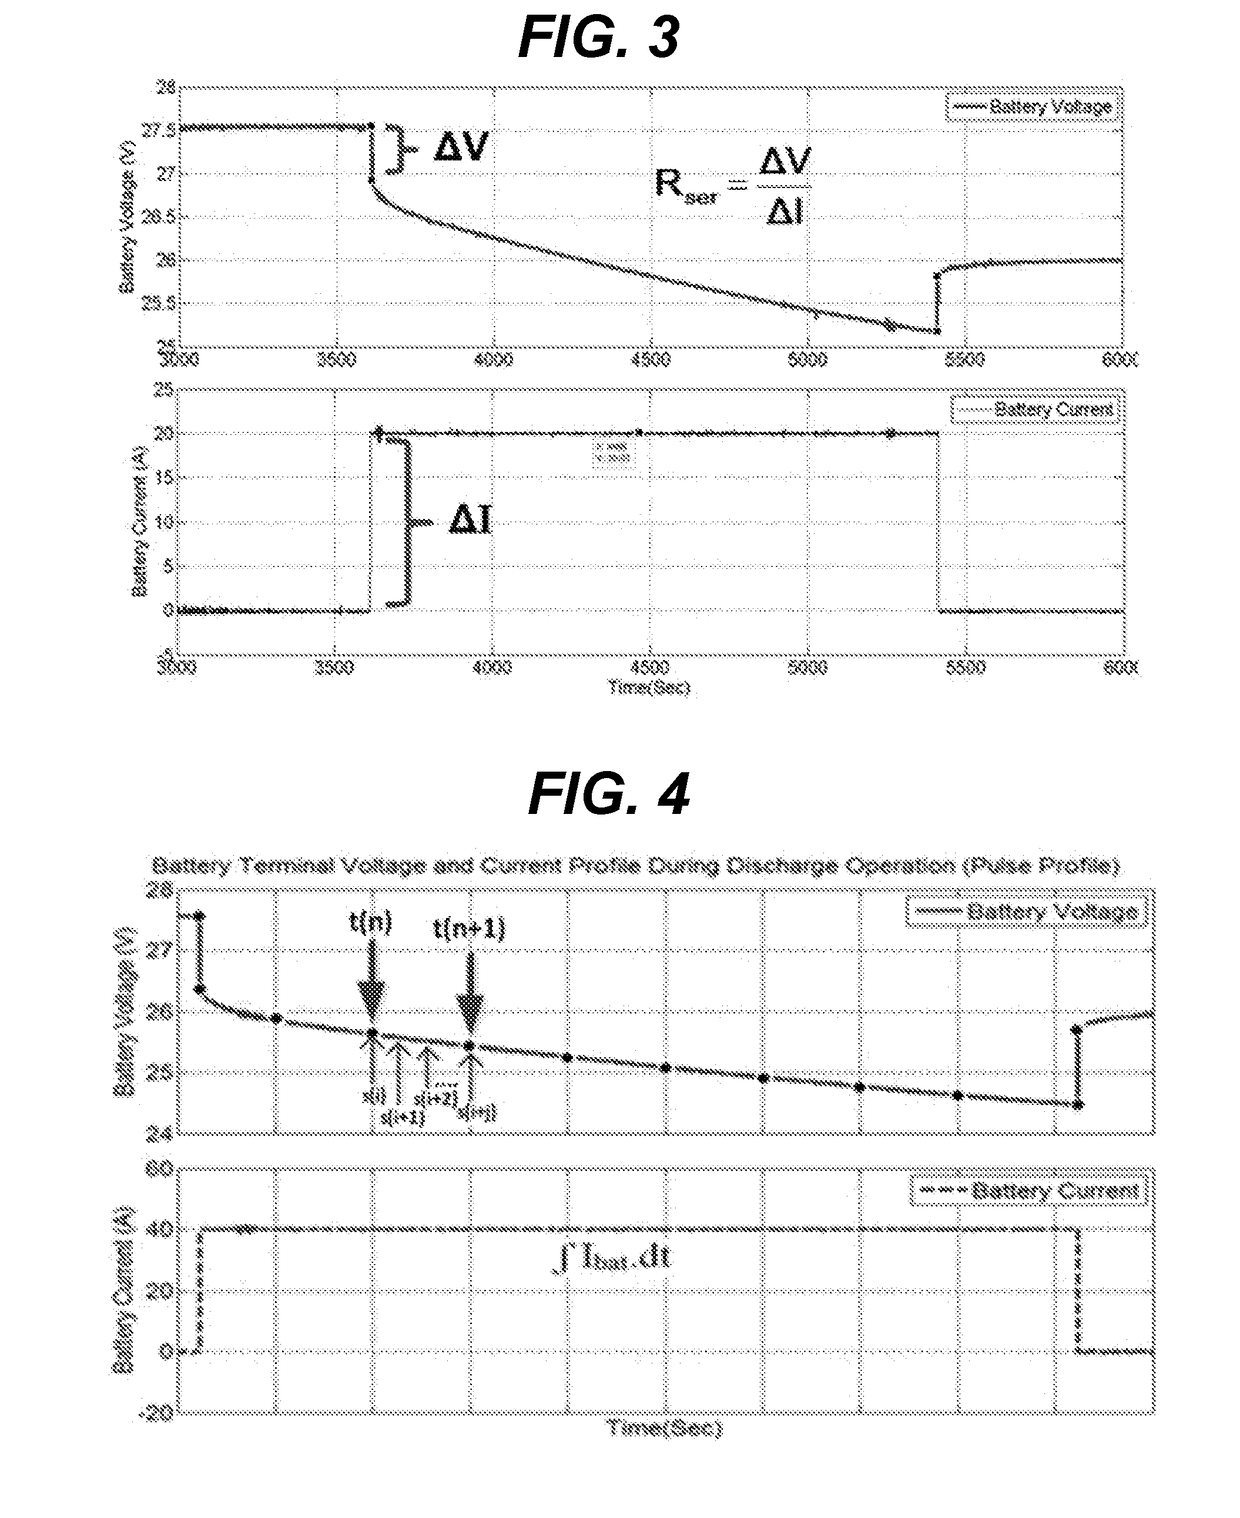 Online determination of model parameters of lead acid batteries and computation of soc and soh